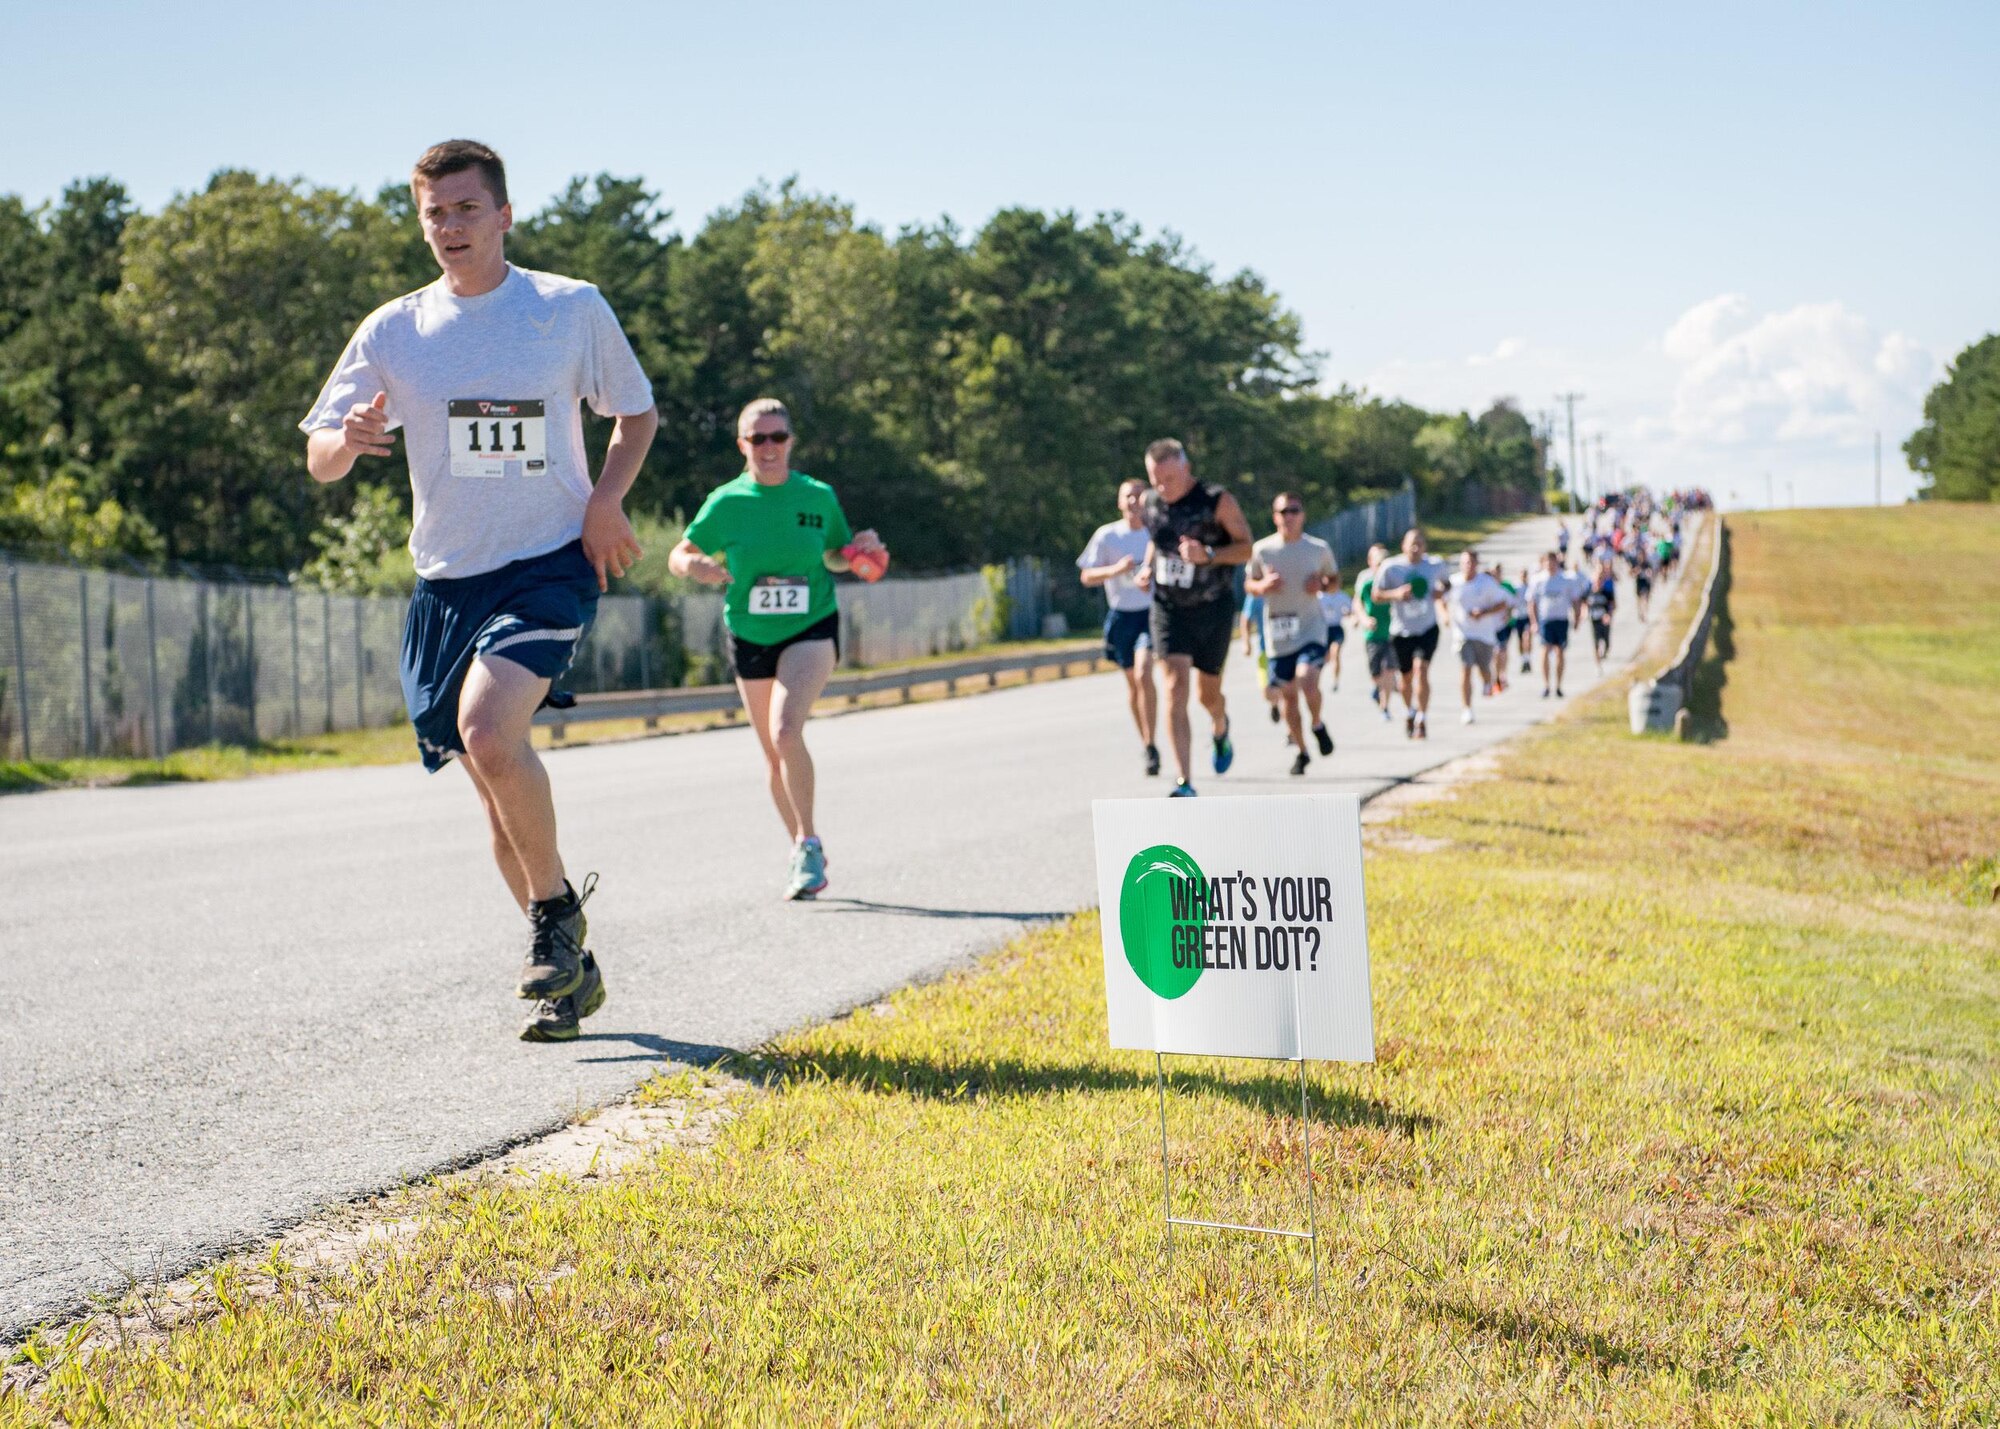 Airmen from the 102nd Intelligence Wing participate in a 5k to raise awareness of the Green Dot program. Green Dot is a non-profit program that aims to prevent incidents of violence.